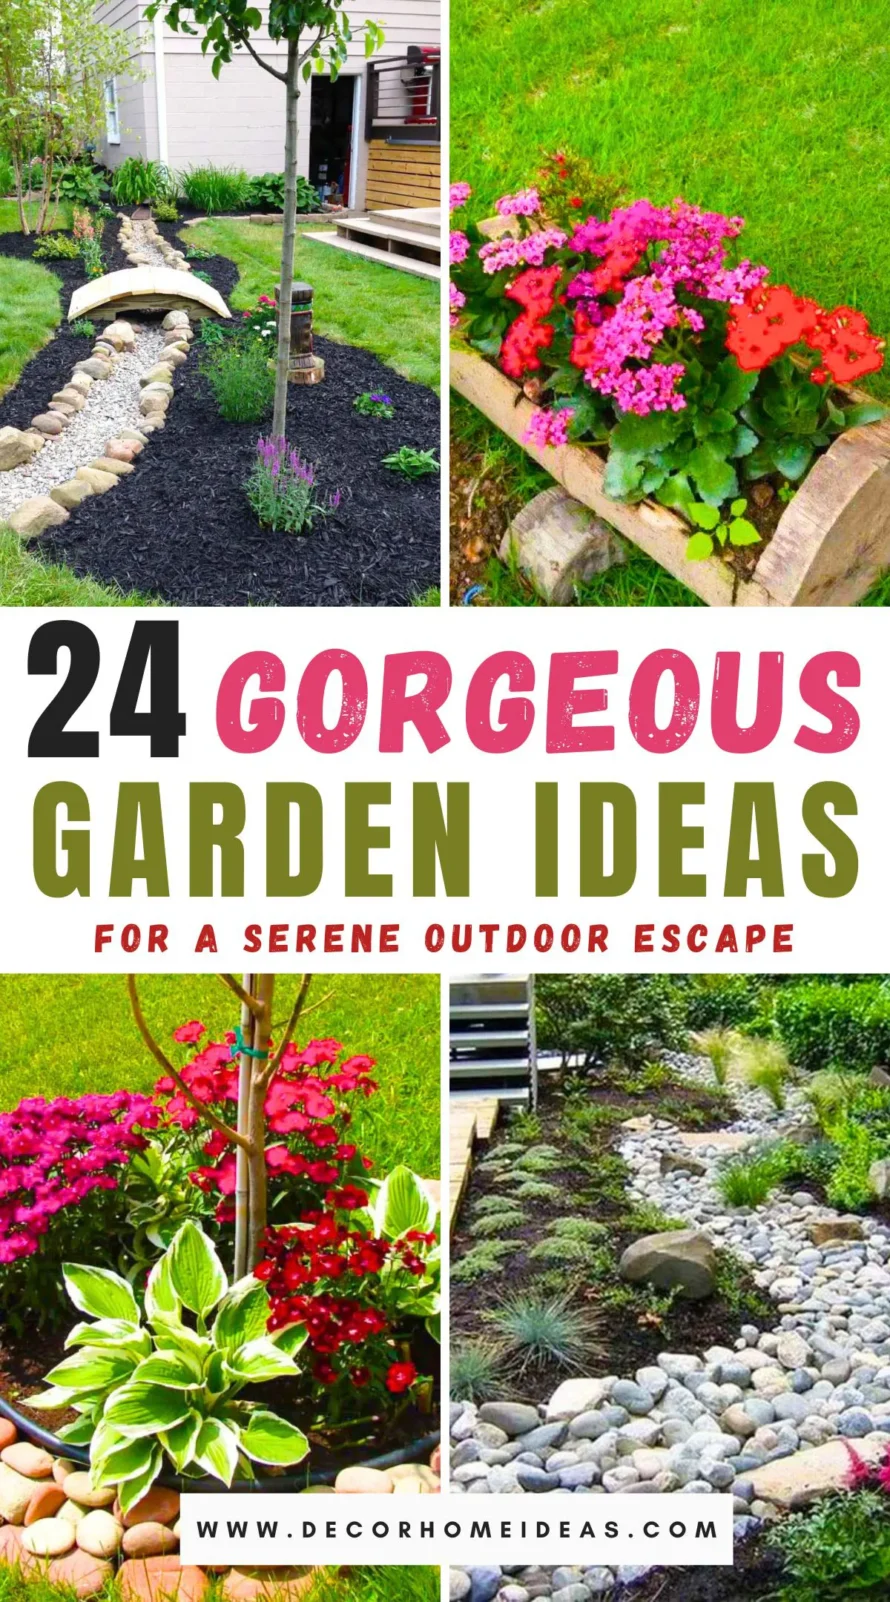 Transform your outdoor space with these 24 enchanting garden designs, creating a haven of beauty and tranquility. From lush greenery to colorful blooms, each design offers a unique blend of elegance and serenity, perfect for enjoying nature's splendor right in your backyard.